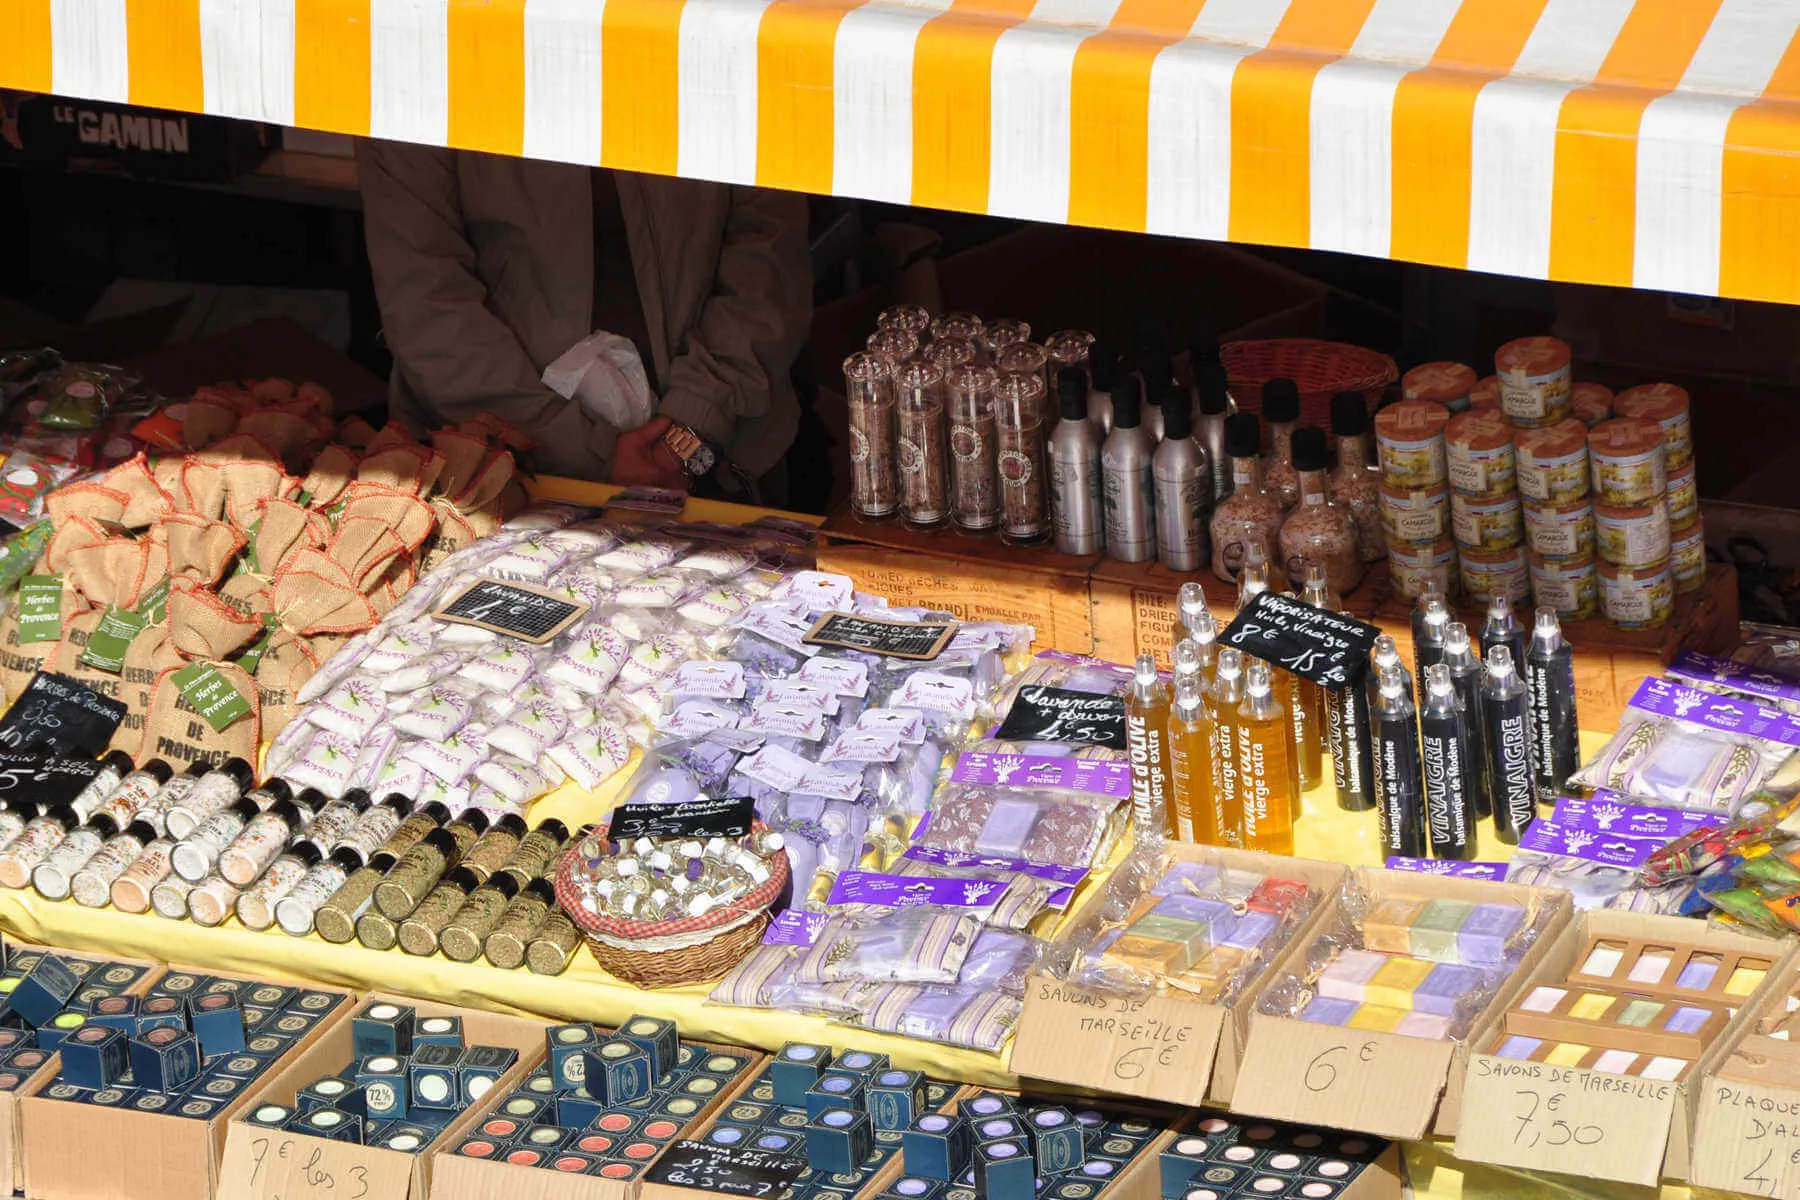 At the Cours Saleya market, the emphasis is on local products